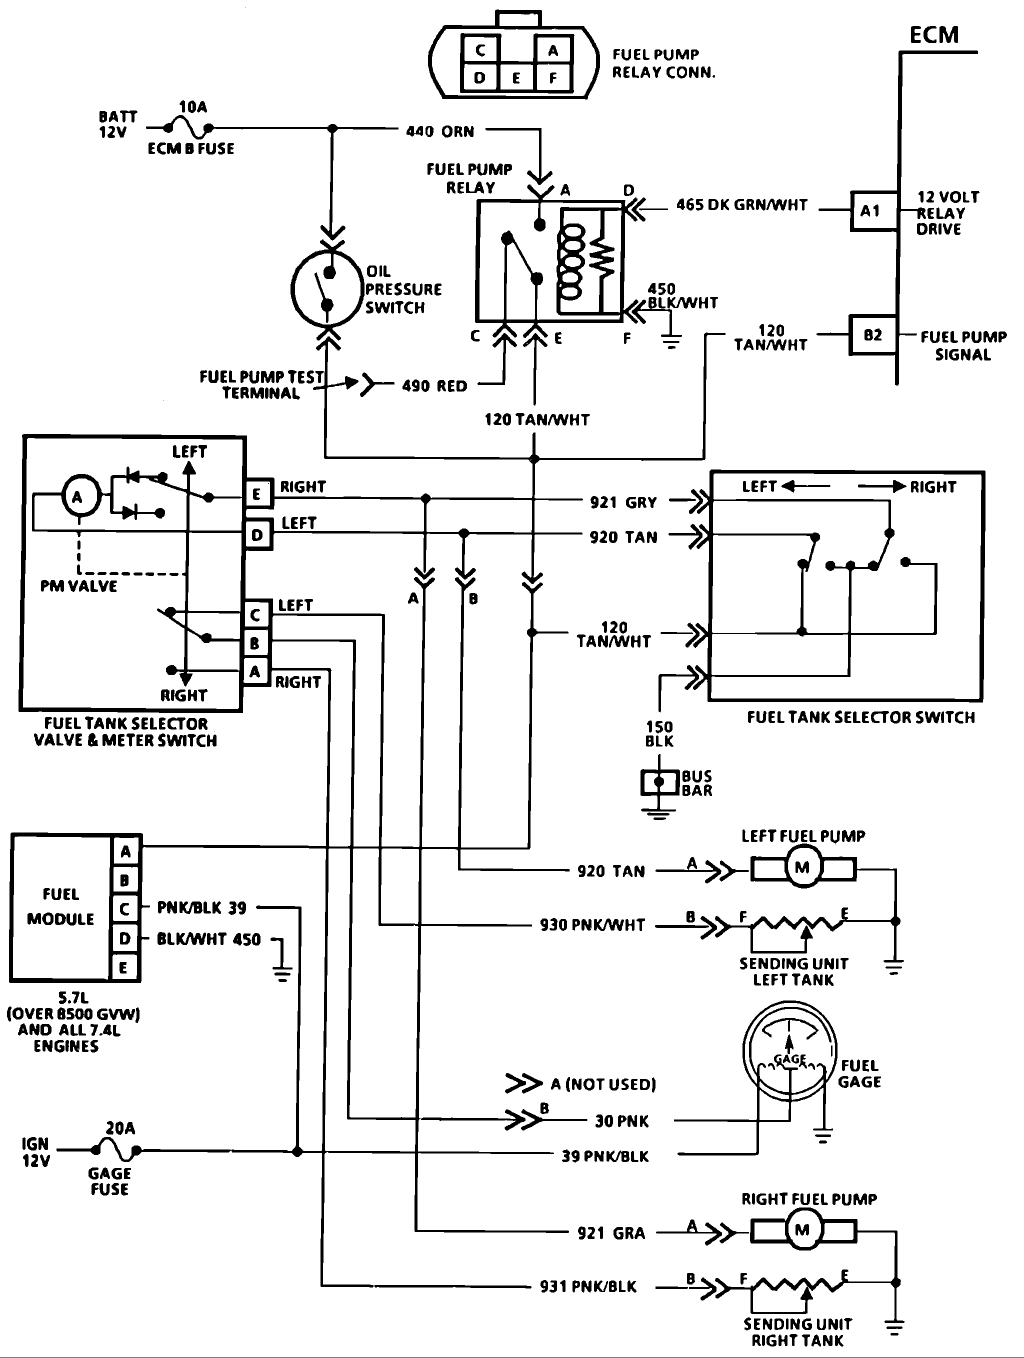 Fuel Tank Selector Switch Wiring Diagram from www.gmtruckclub.com